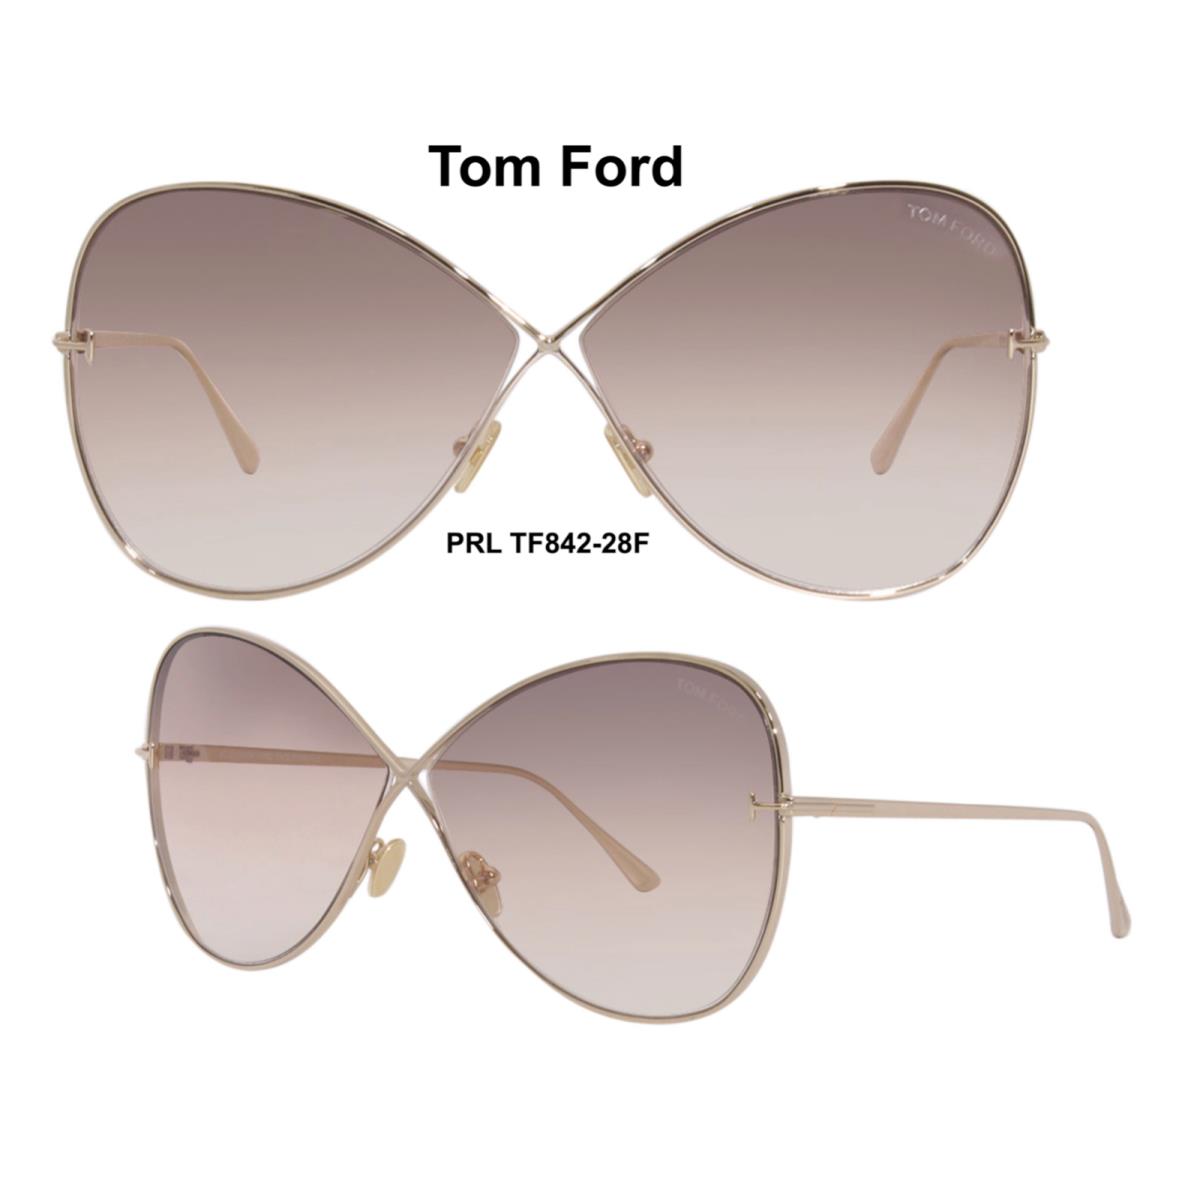 Tom Ford TF 842 28F Nickie Sunglasses Gold Brown FT 842 28F - Gold Frame, Brown Lens